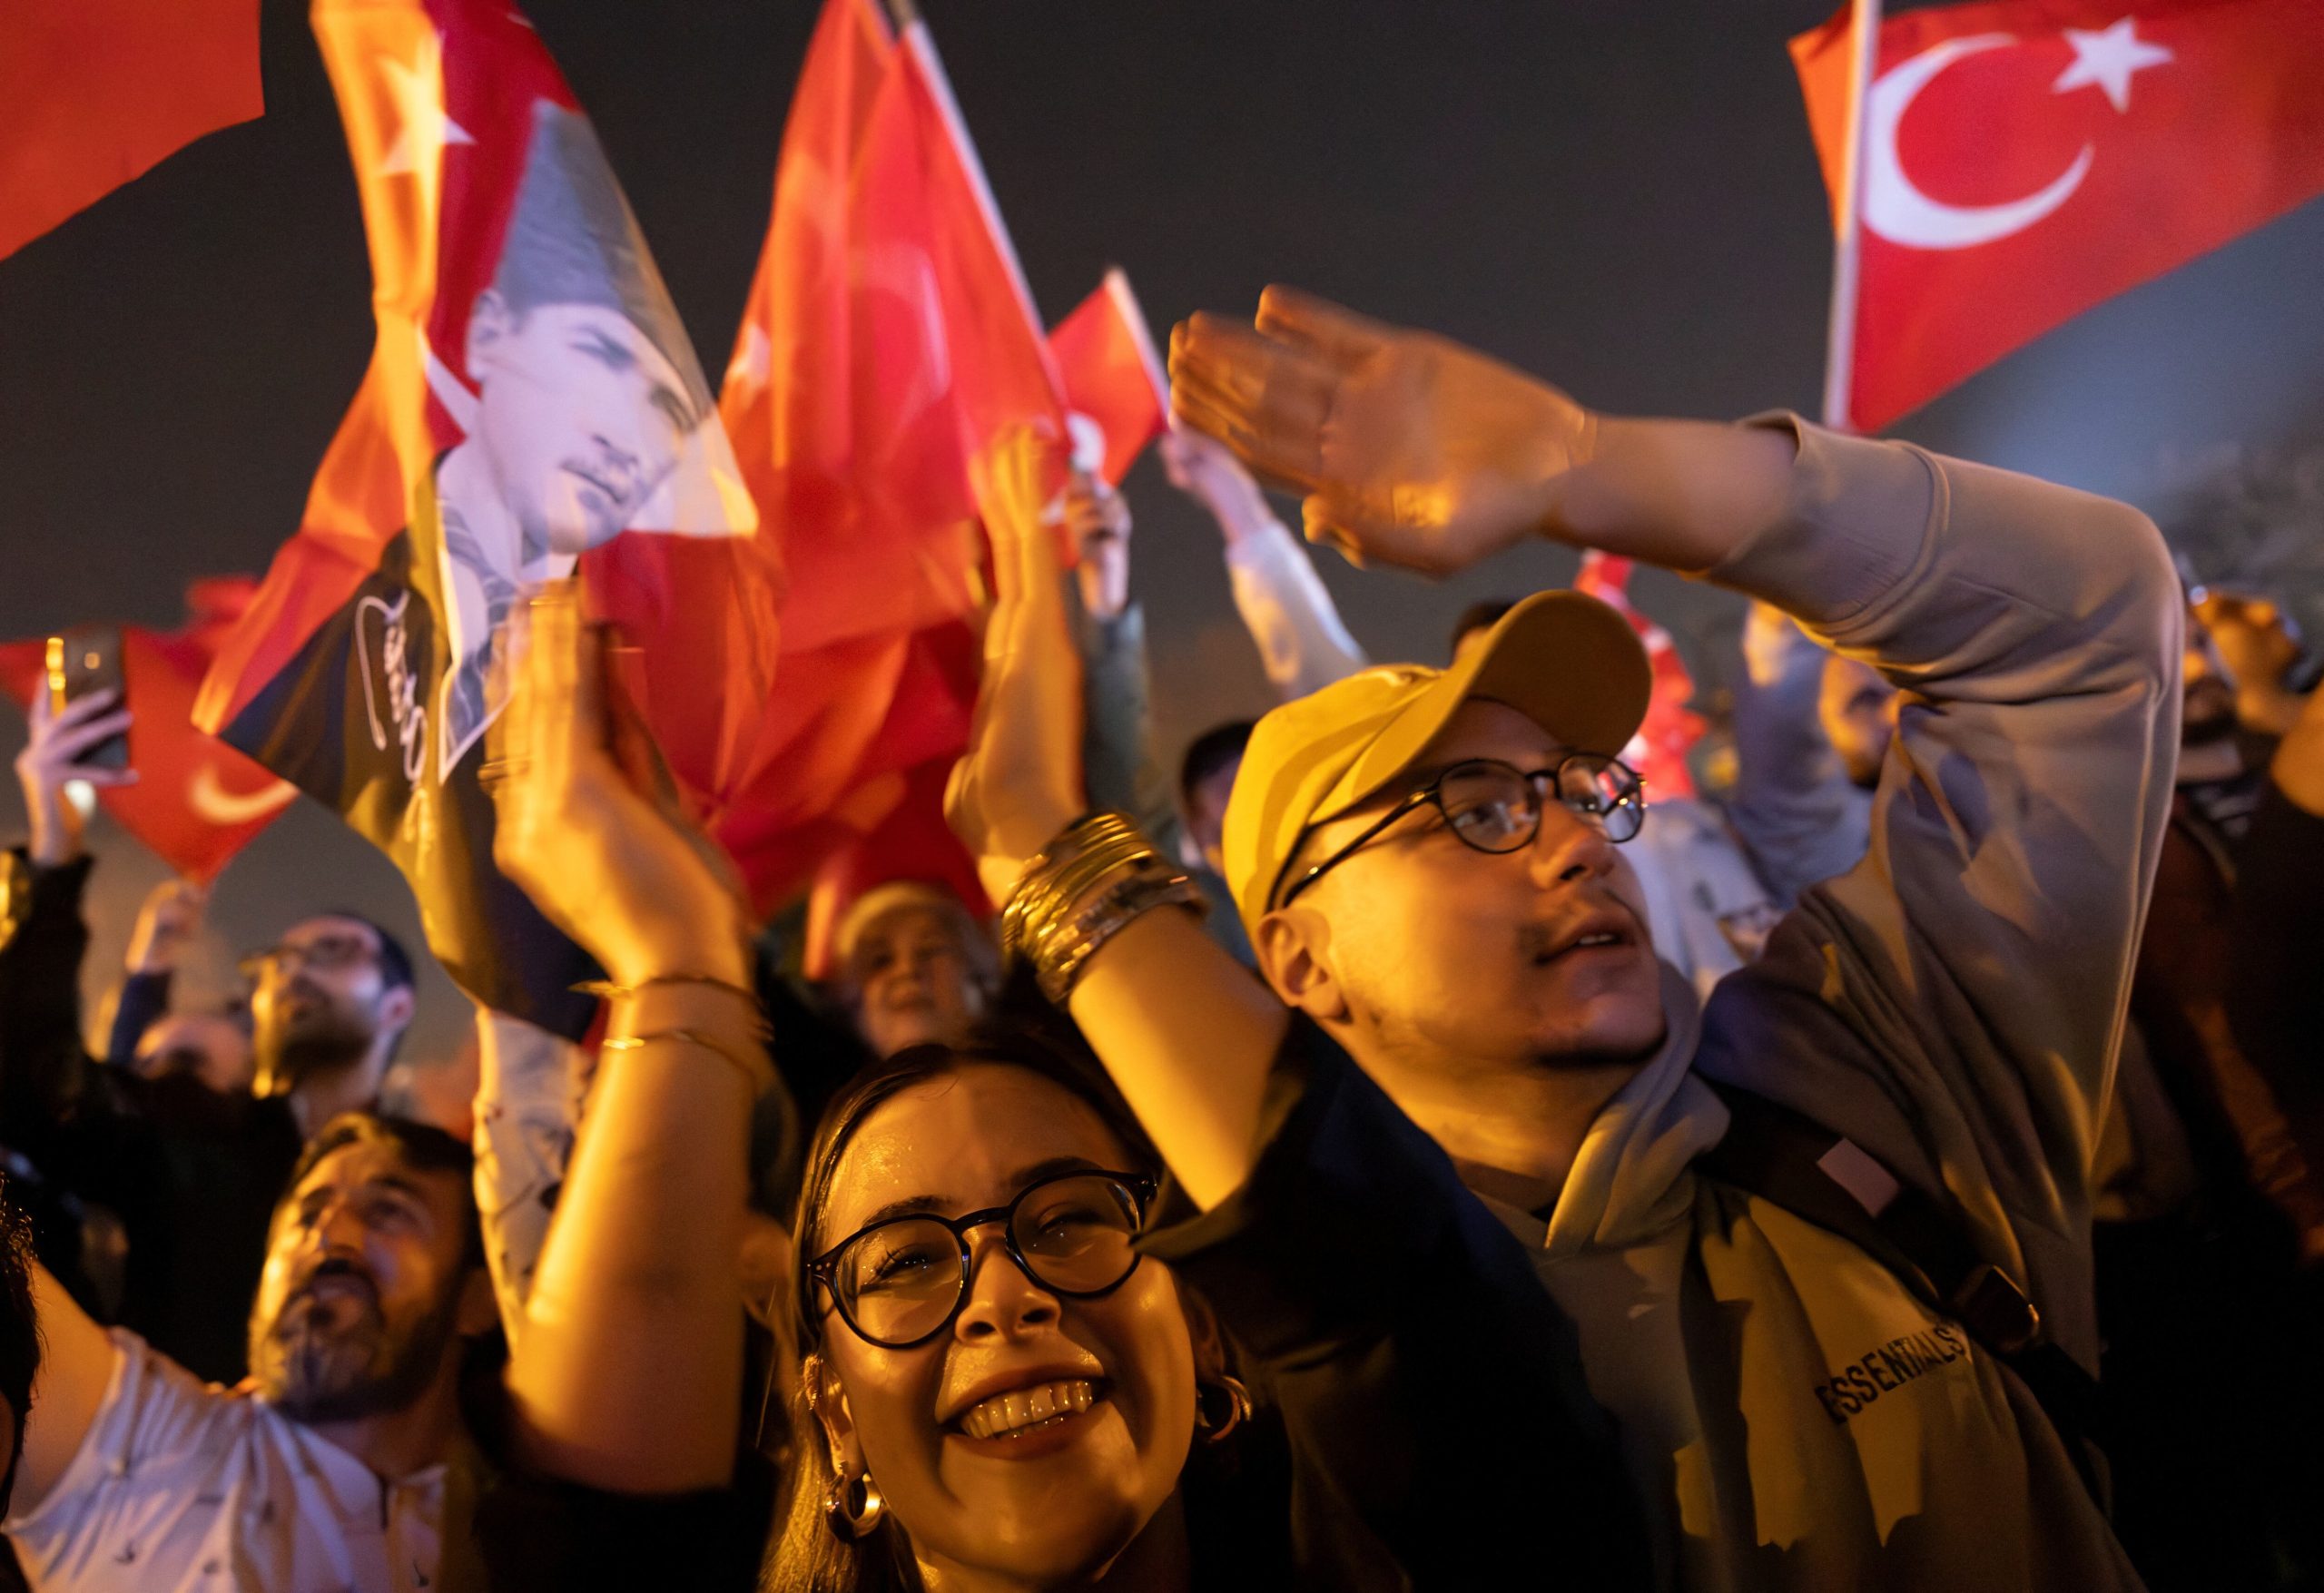 Turkey's Opposition Secures Key Cities in Local Elections, Challenging Erdogan's Grip on Power